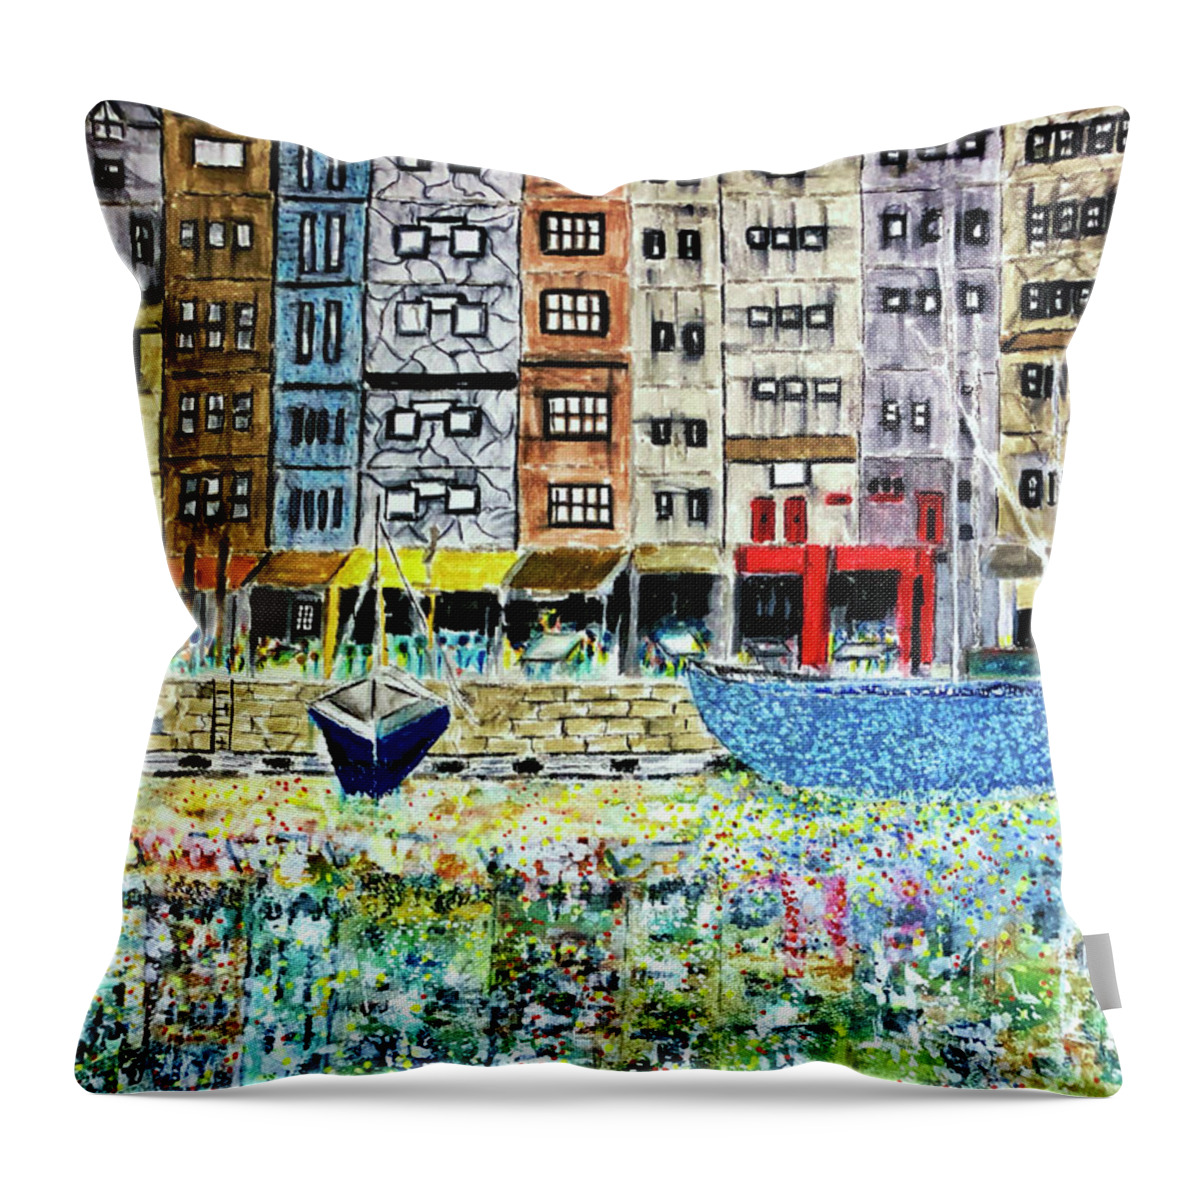 Contemporary Impressionist Throw Pillow featuring the painting Porta by Dennis Ellman